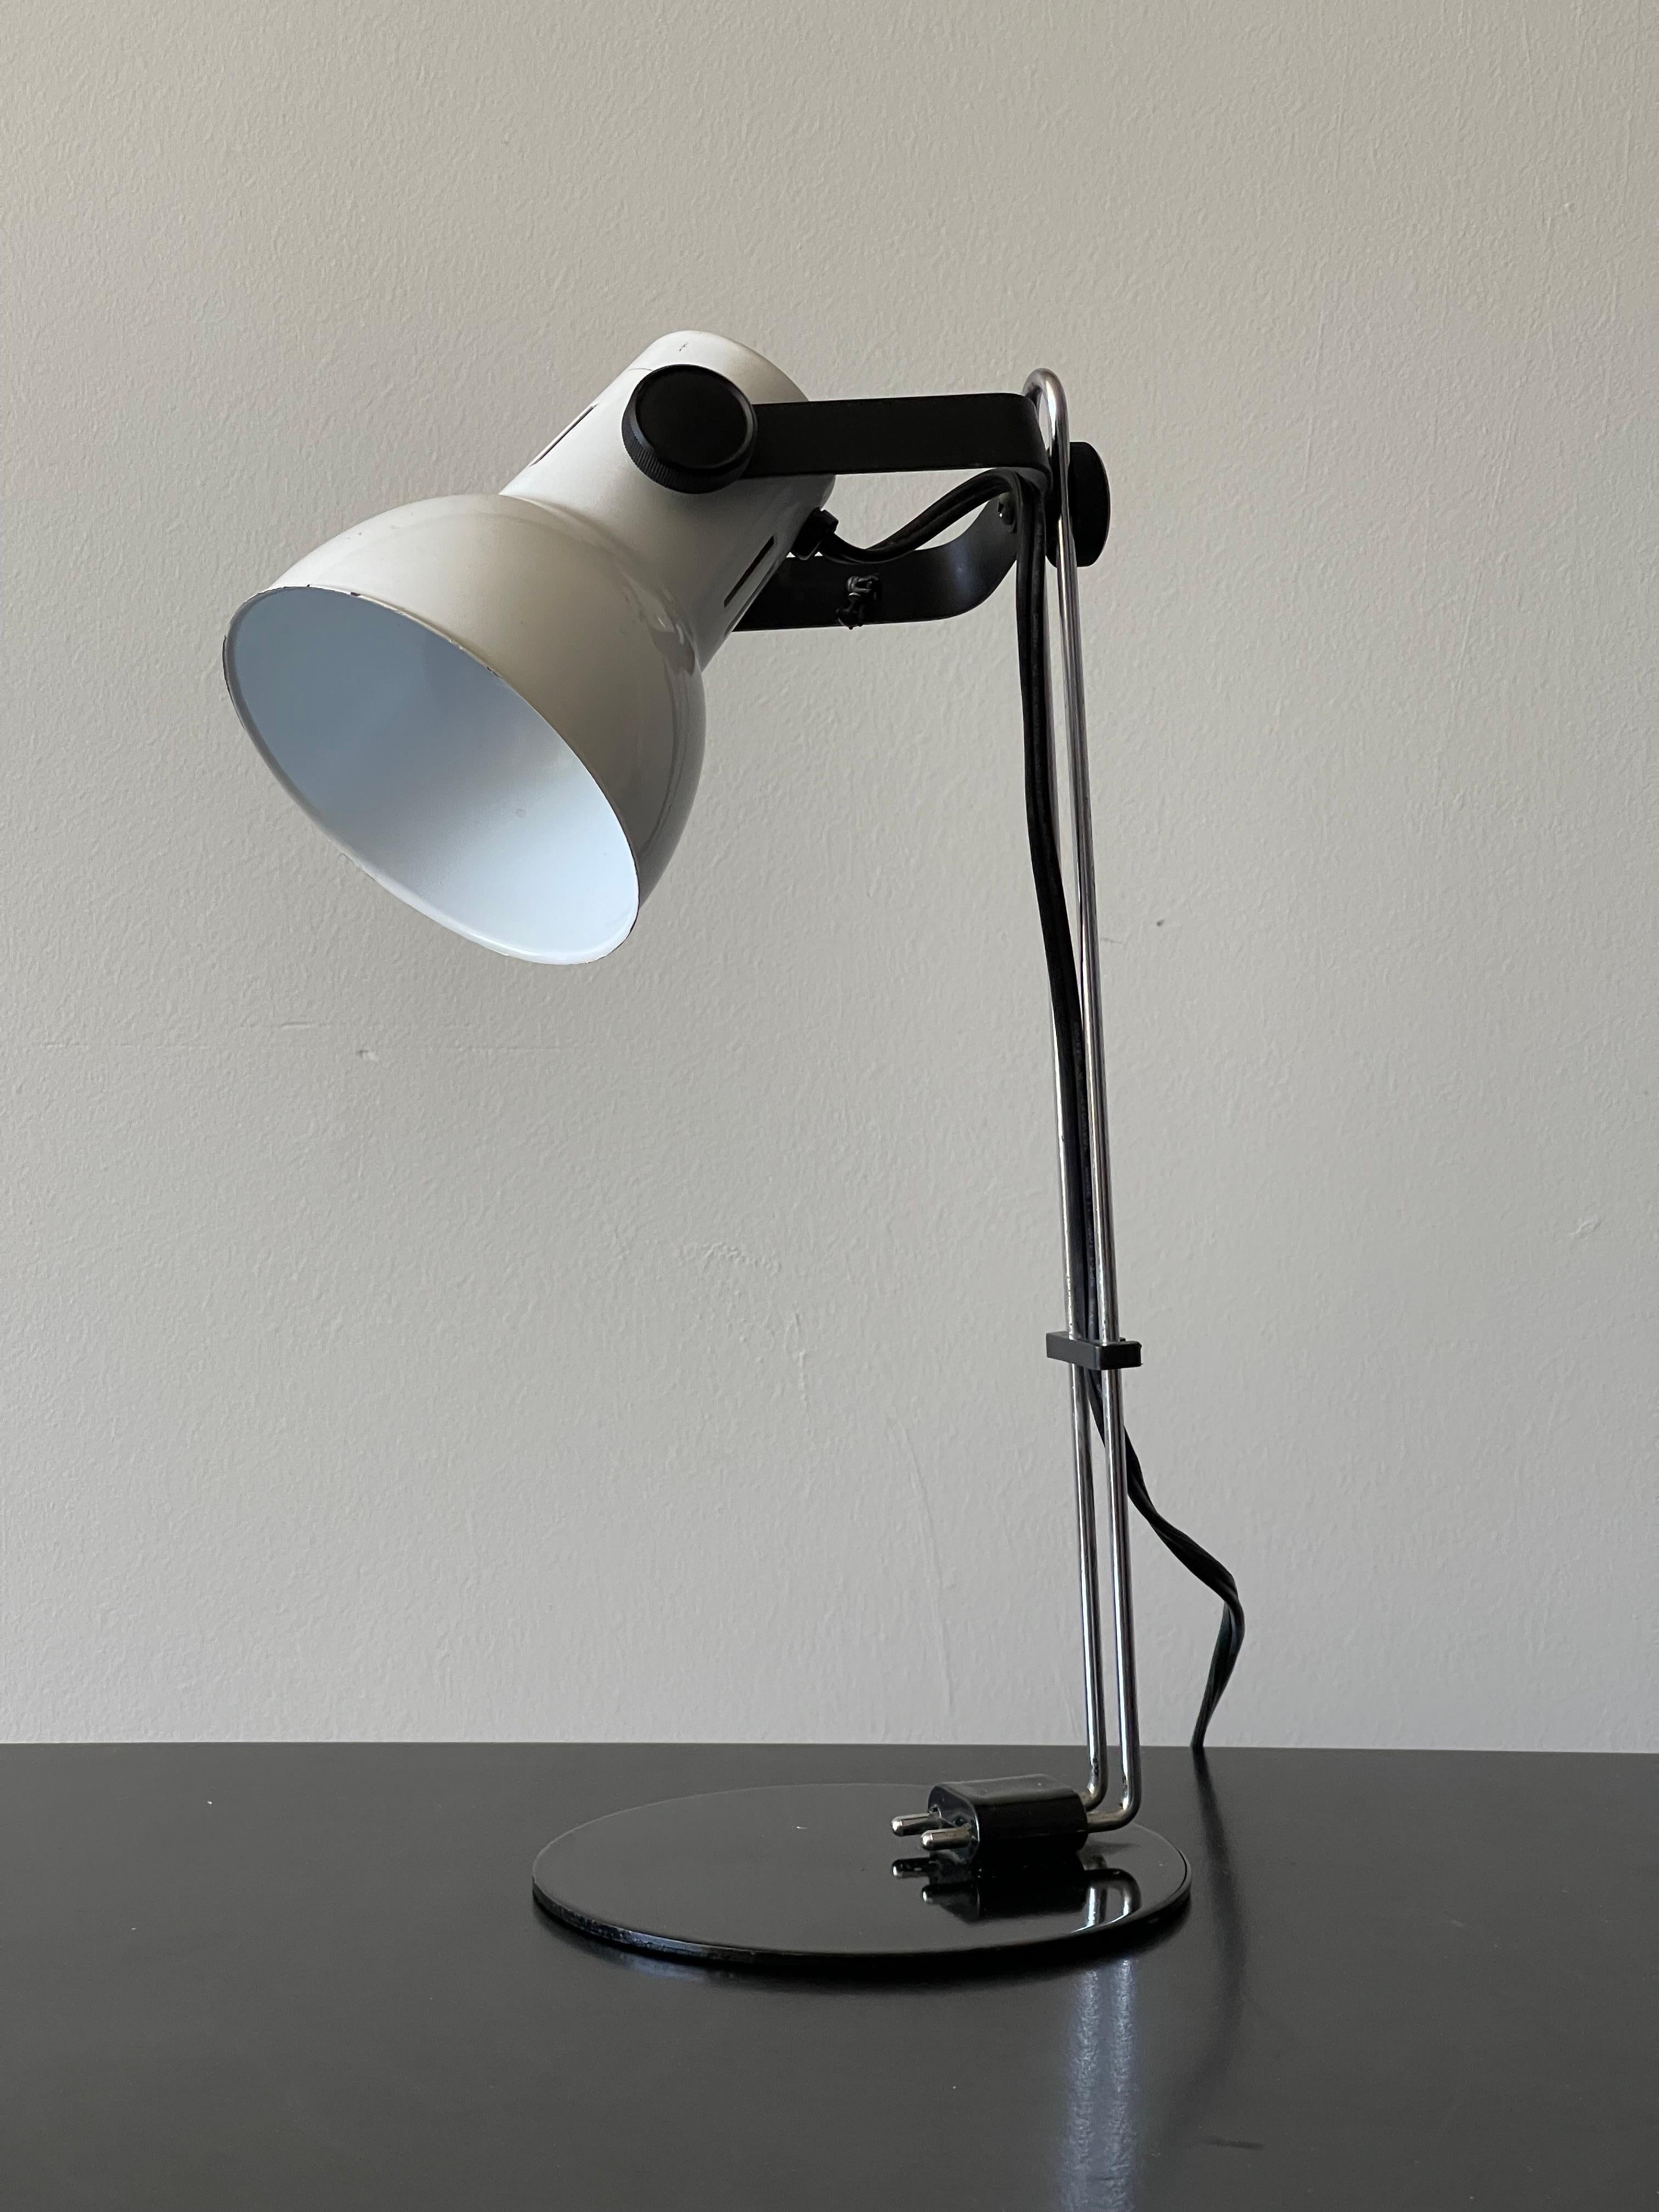 Architectural small desk lamp - articulated in every direction. The cord holder moves up and down to distribute more cord. Fun little desk lamp! 12” tall x 6.5” deep x 5” wide round metal base.